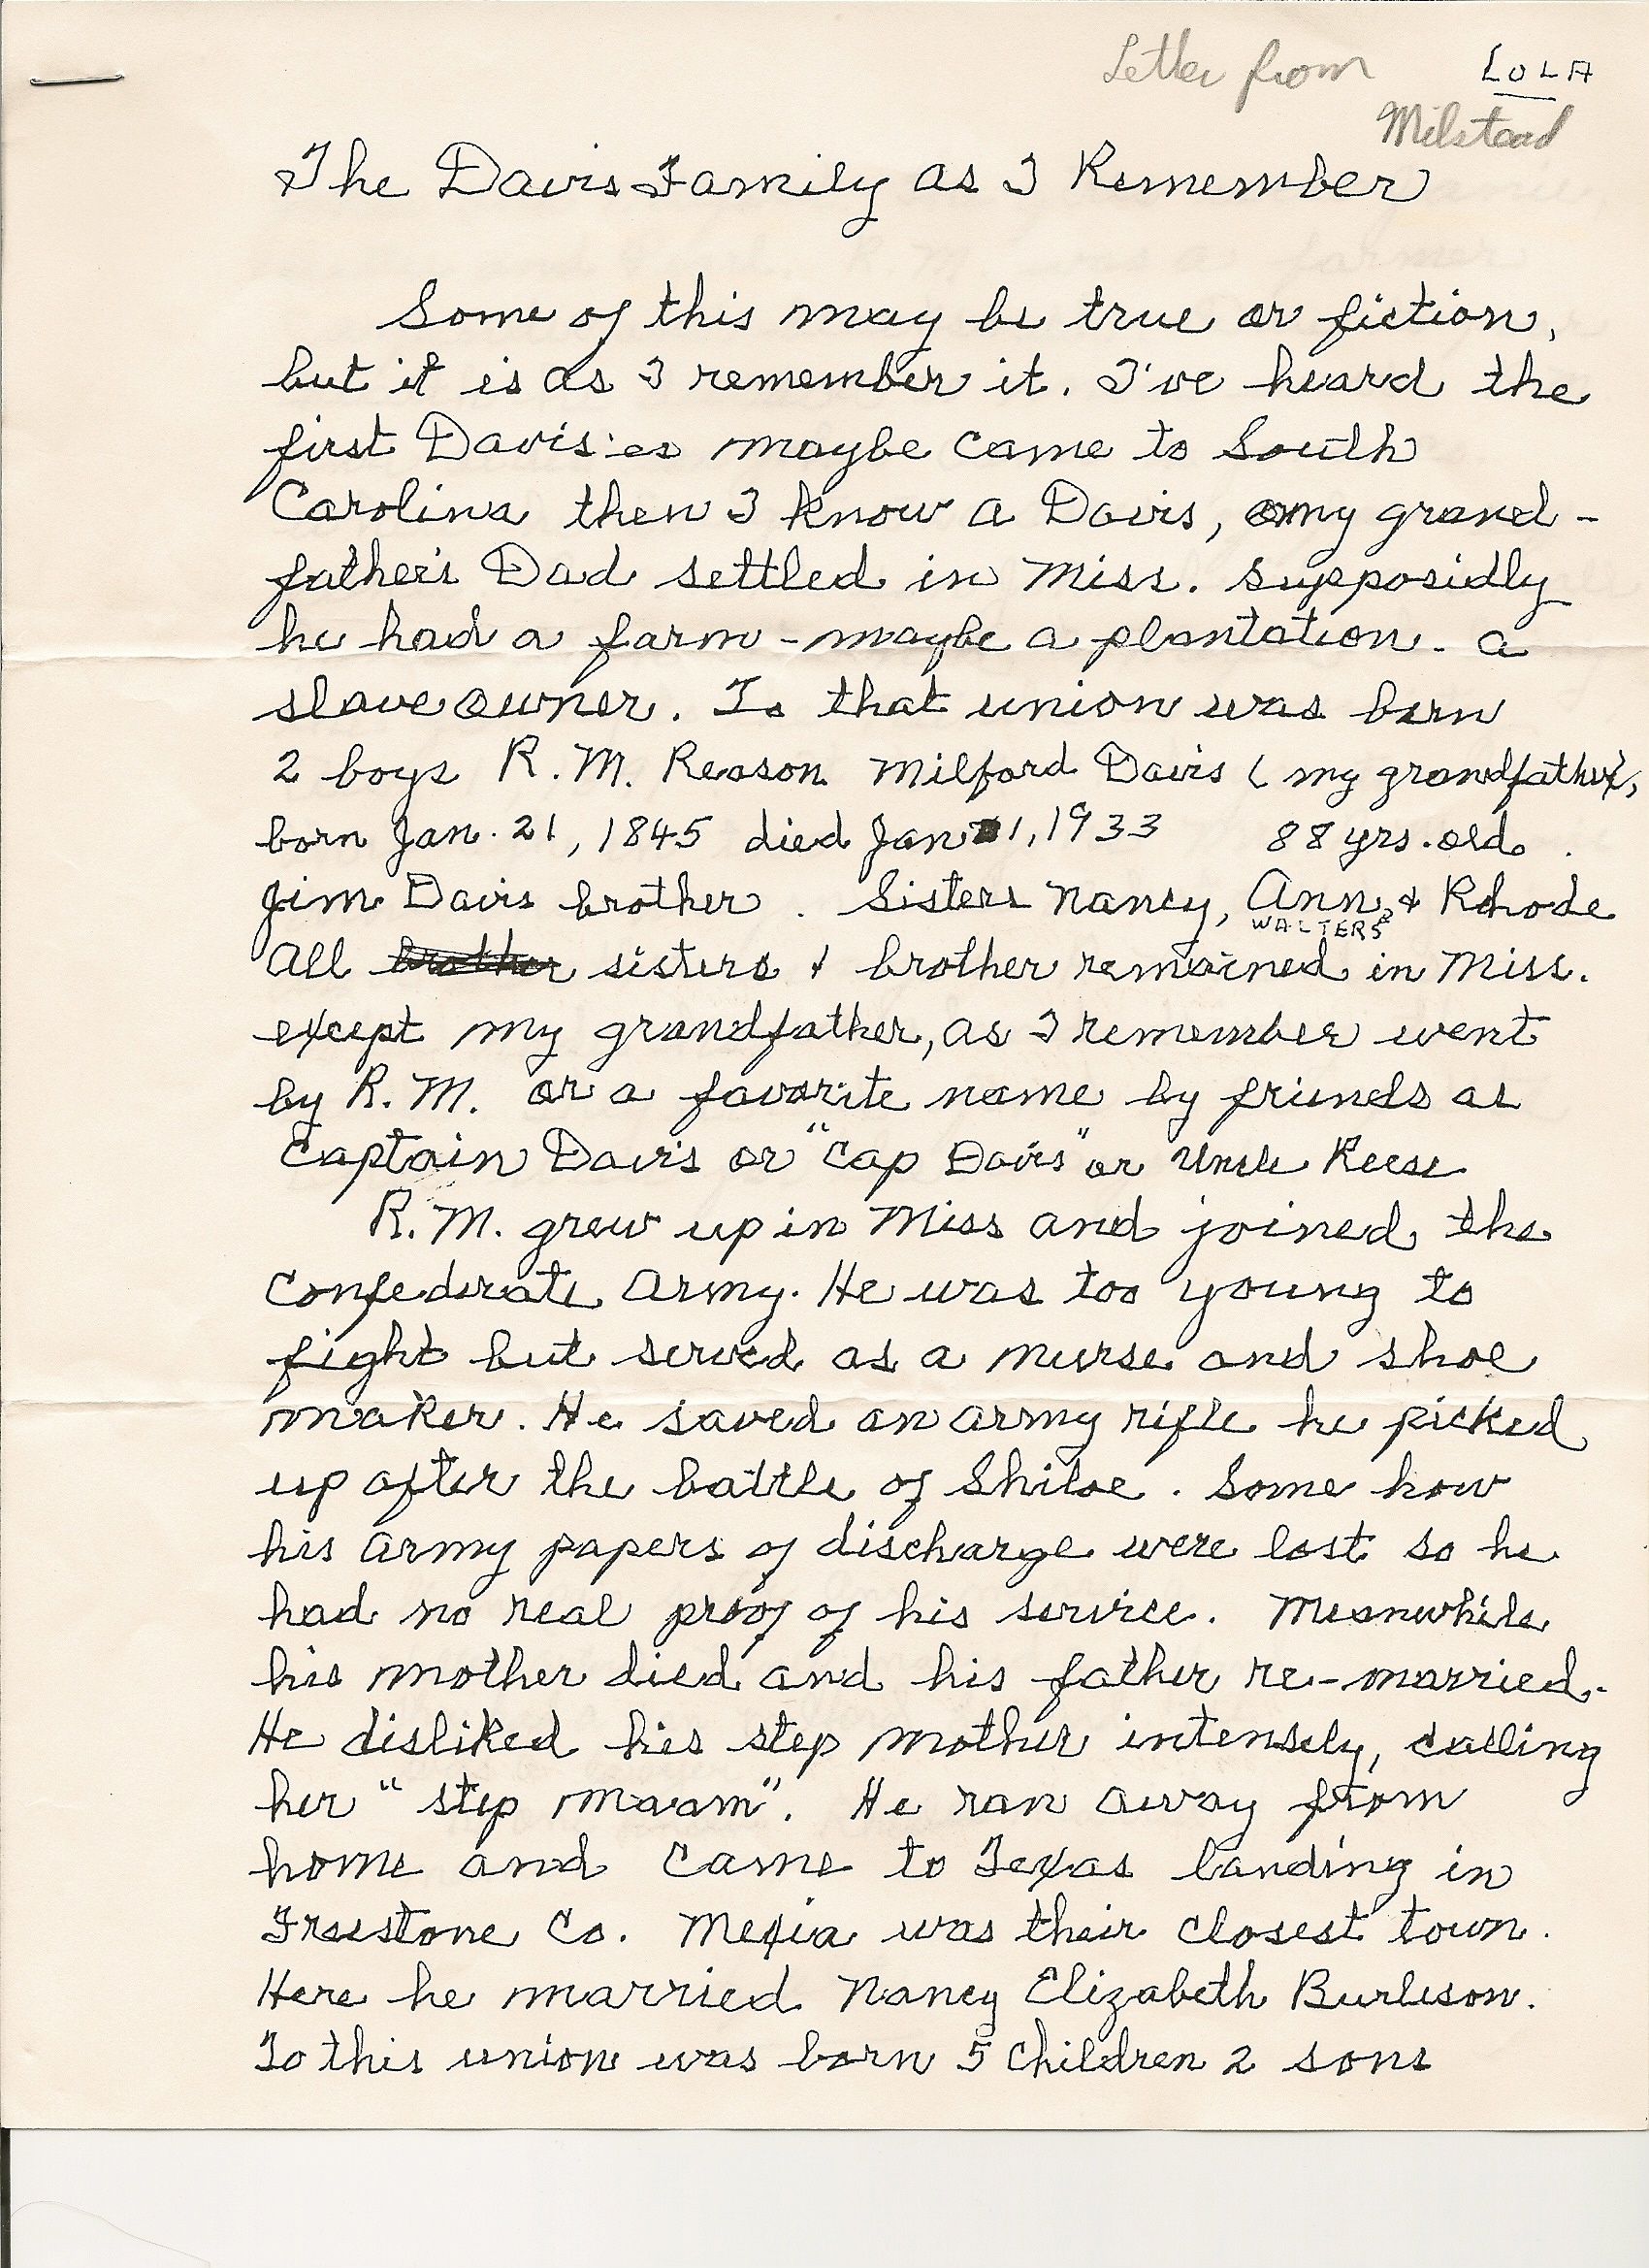 Lola Milstead letter page 1